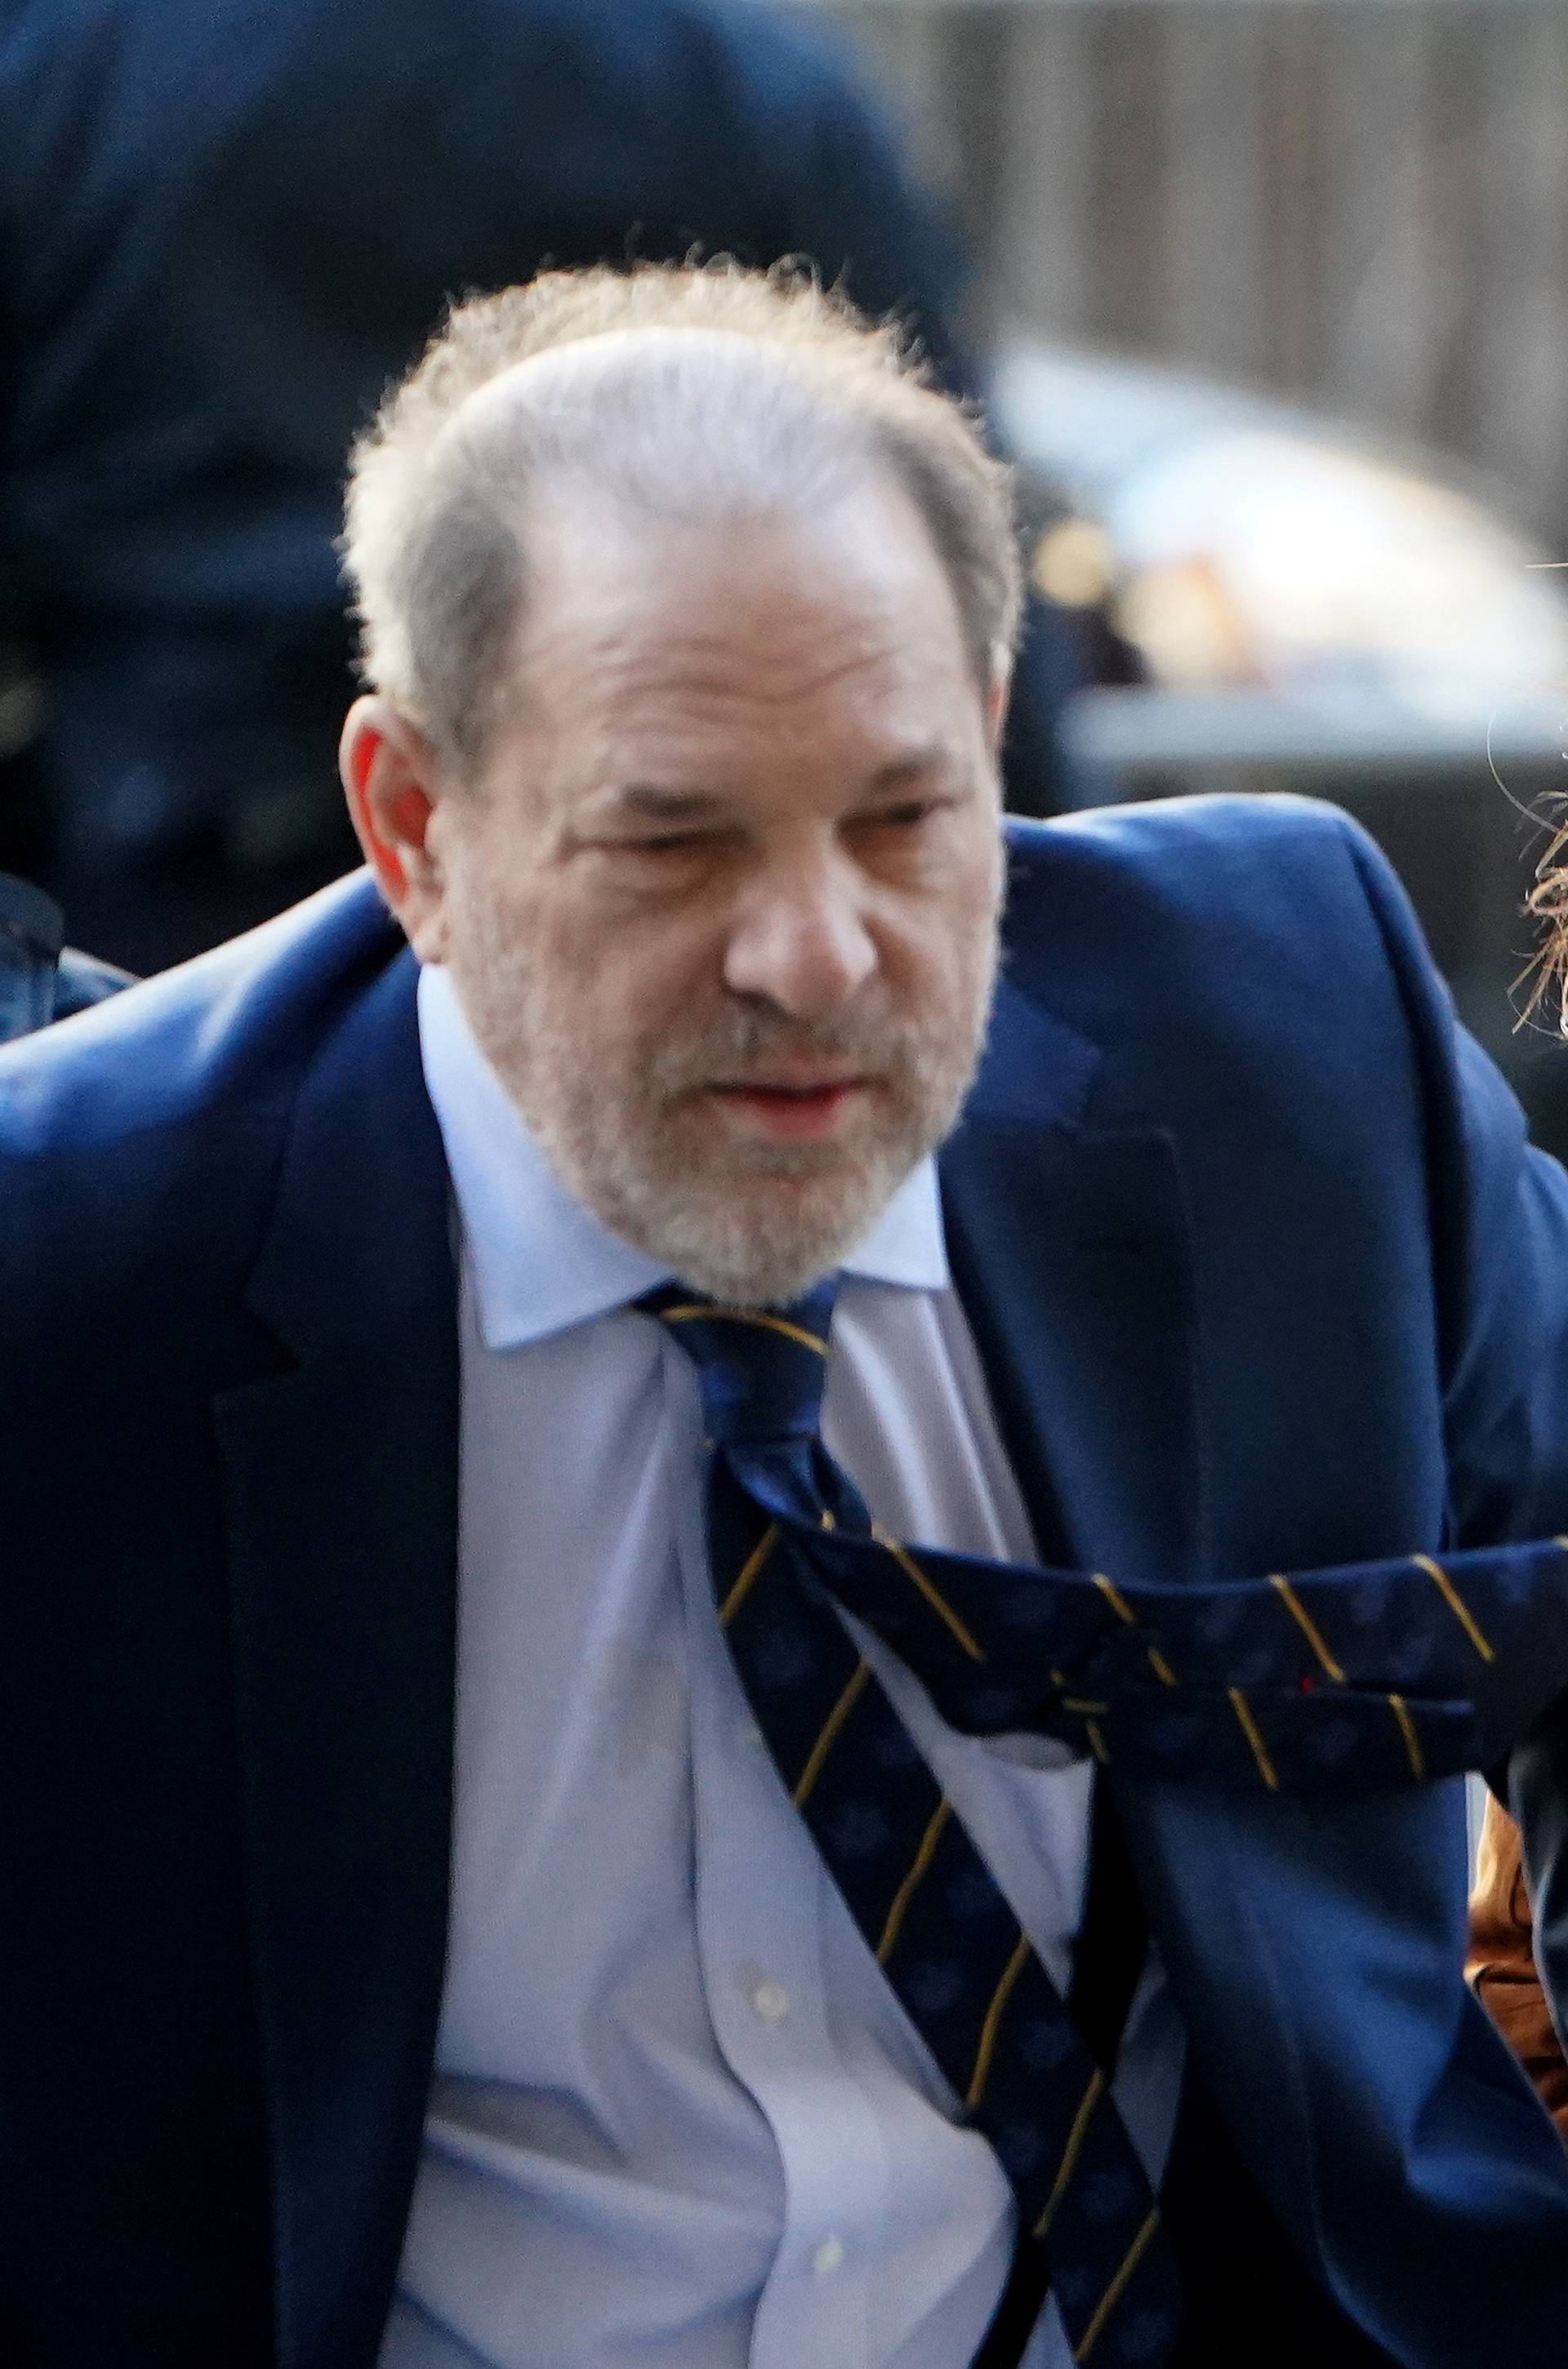 Film producer Harvey Weinstein and attorney Donna Rotunno arrive at New York Criminal Court during his ongoing sexual assault trial in the Manhattan borough of New York City